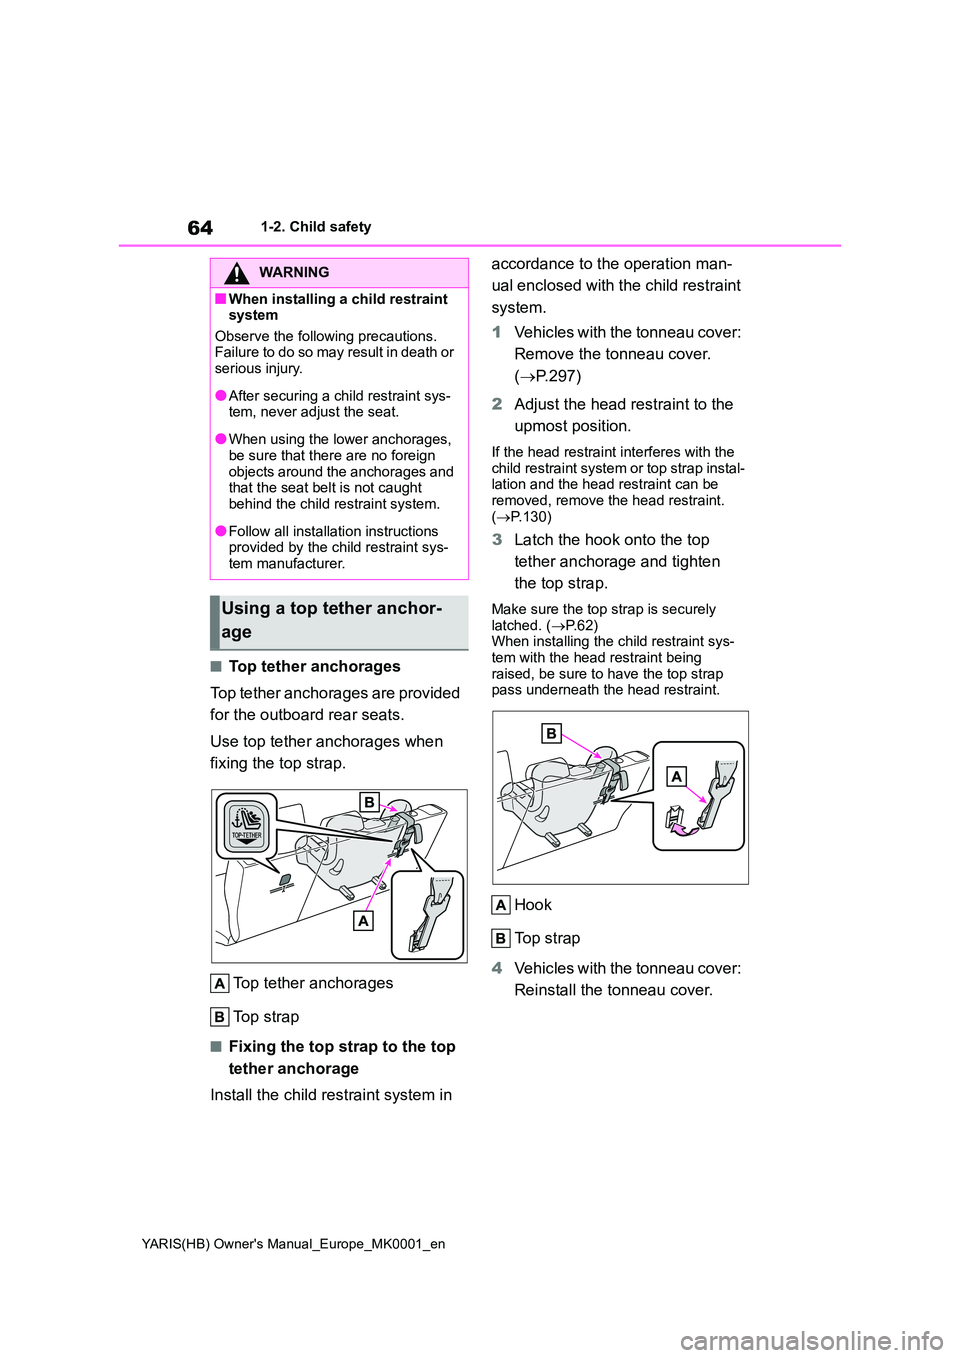 TOYOTA YARIS 2021 Owners Manual 64
YARIS(HB) Owners Manual_Europe_MK0001_en
1-2. Child safety
■Top tether anchorages 
Top tether anchorages are provided  
for the outboard rear seats. 
Use top tether anchorages when  
fixing the 